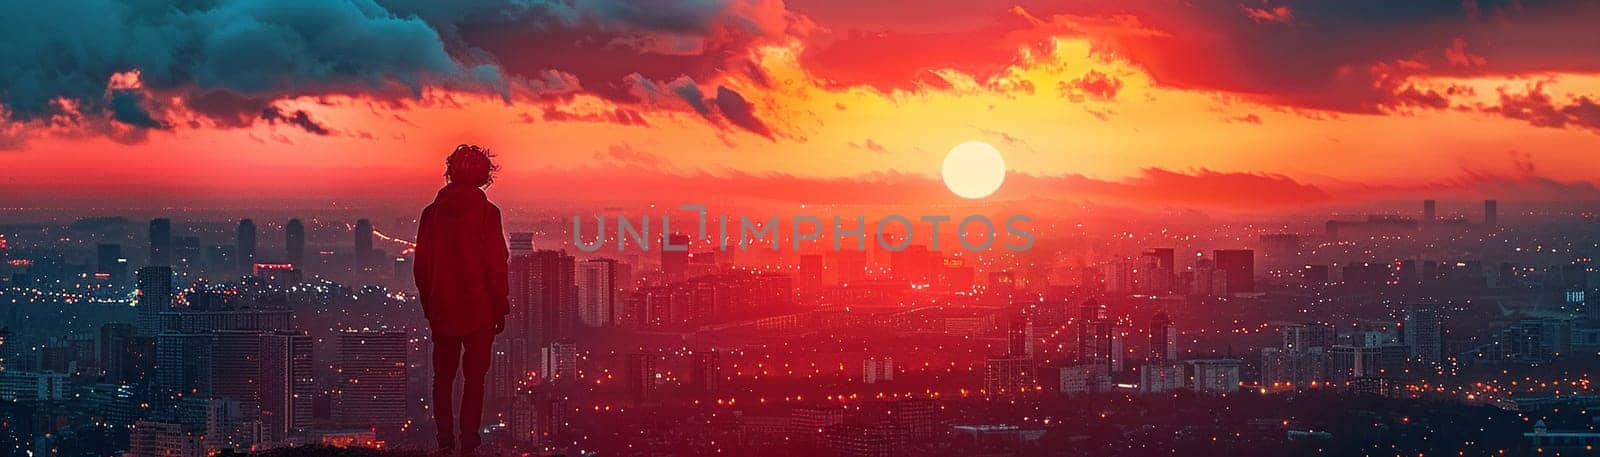 Dreamers silhouette against a sunset city by Benzoix